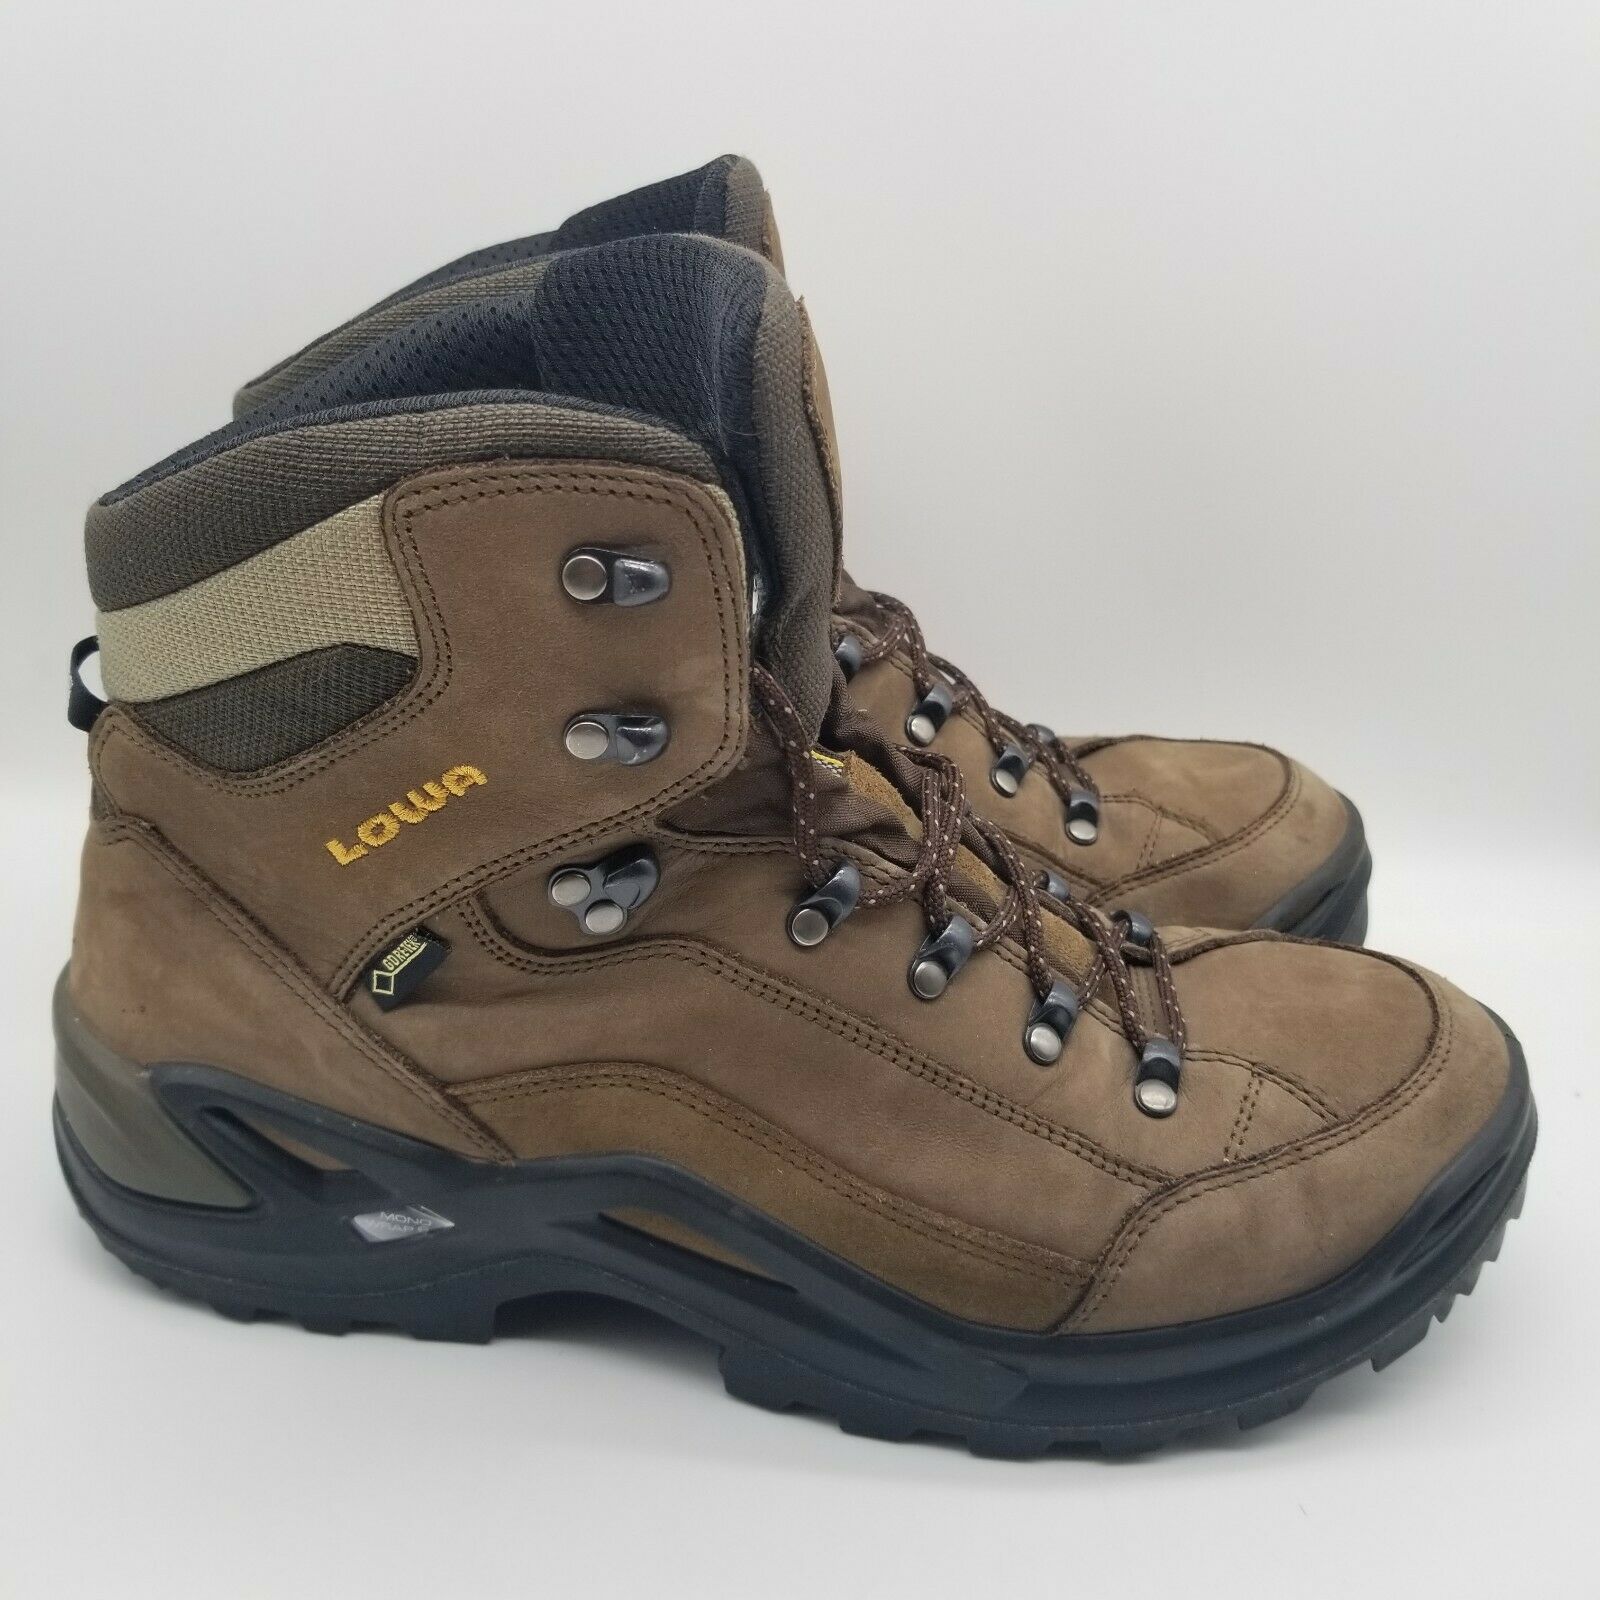 Lowa Men’s Vibram Gtx Mid Wide Leather Hiking Boots Brown Size 12